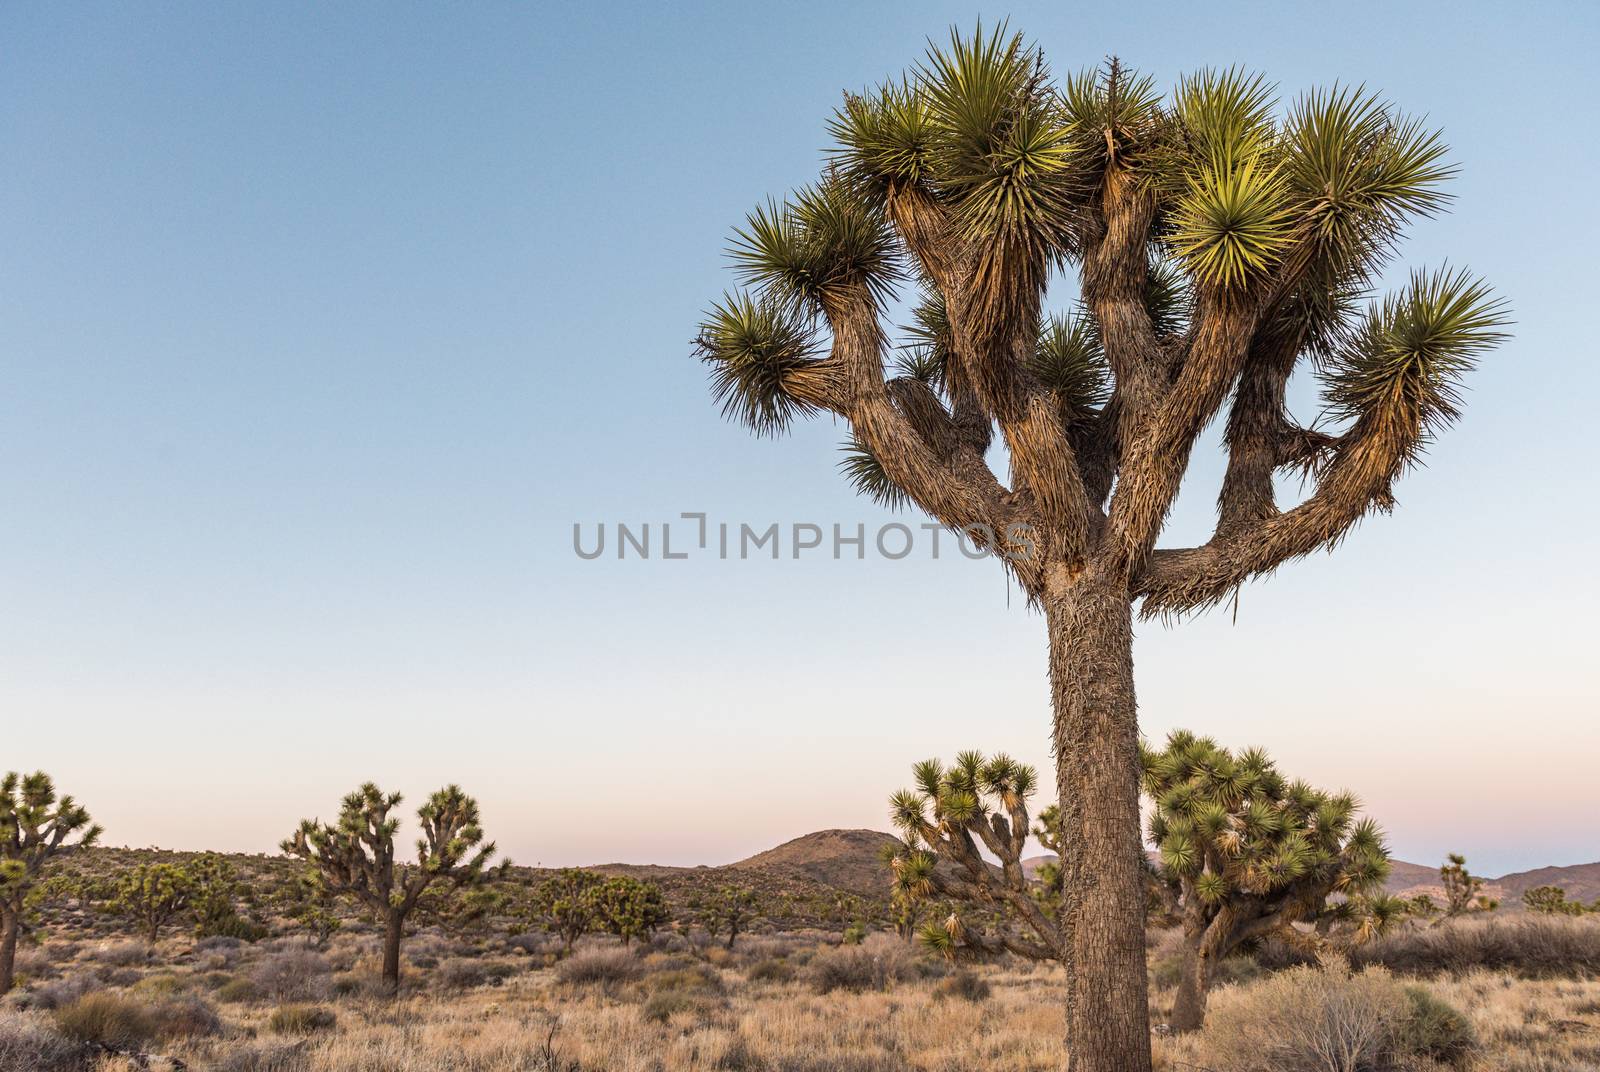 Joshua trees (Yucca brevifolia) at dusk off Stubbe Springs Loop  by Njean